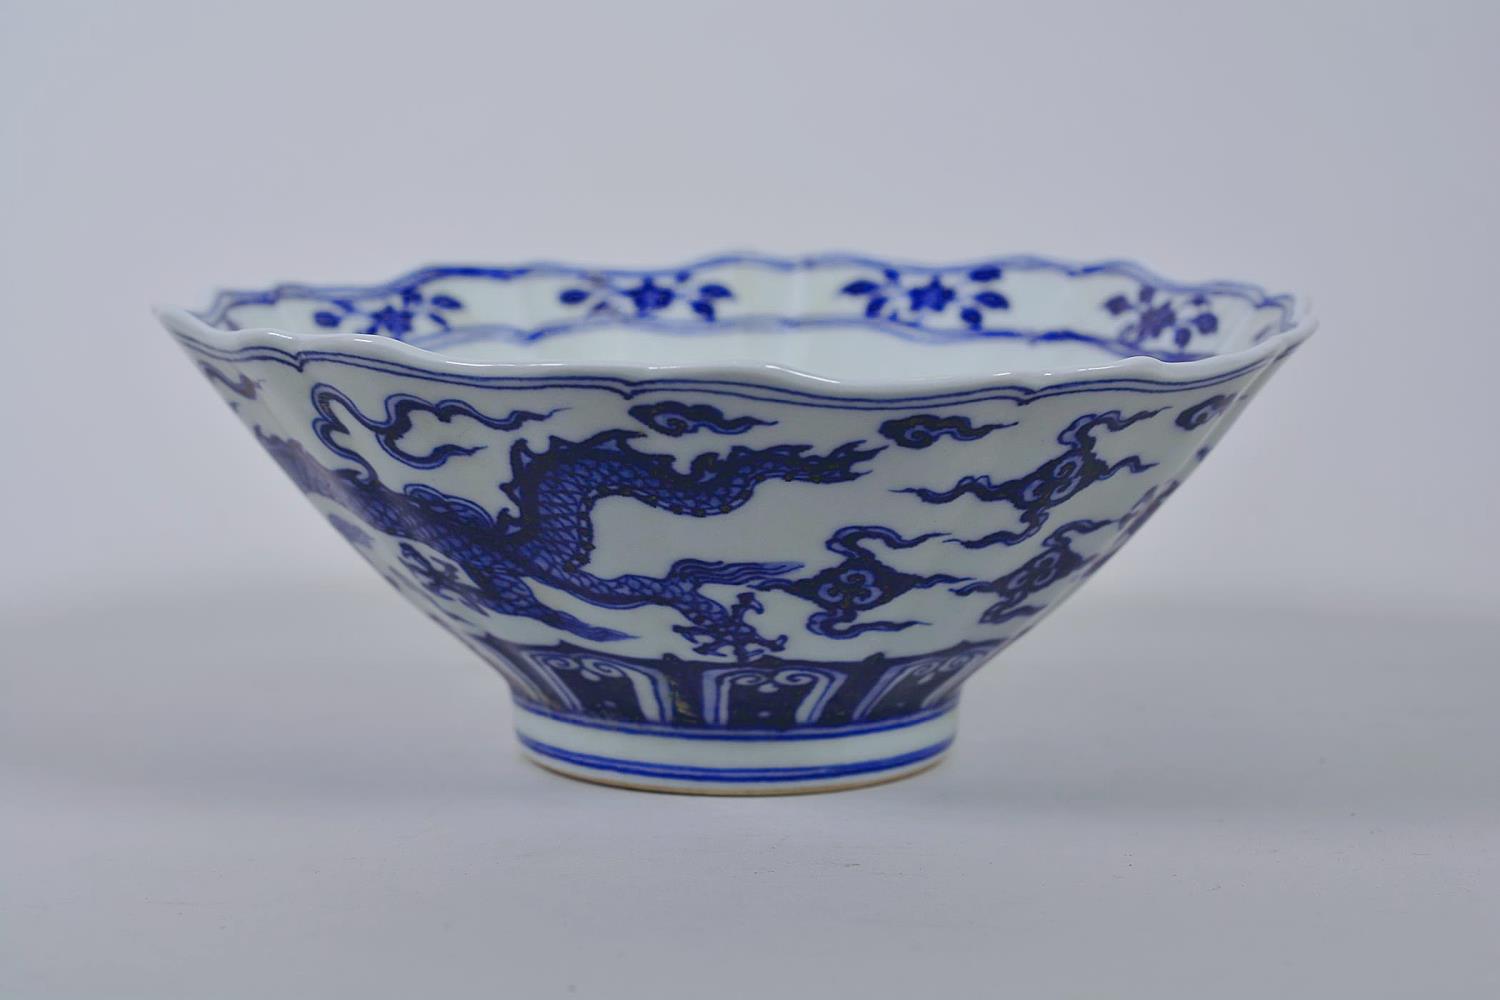 A Chinese blue and white porcelain bowl with a lobed rim and dragon decoration, 6 character mark - Image 3 of 11